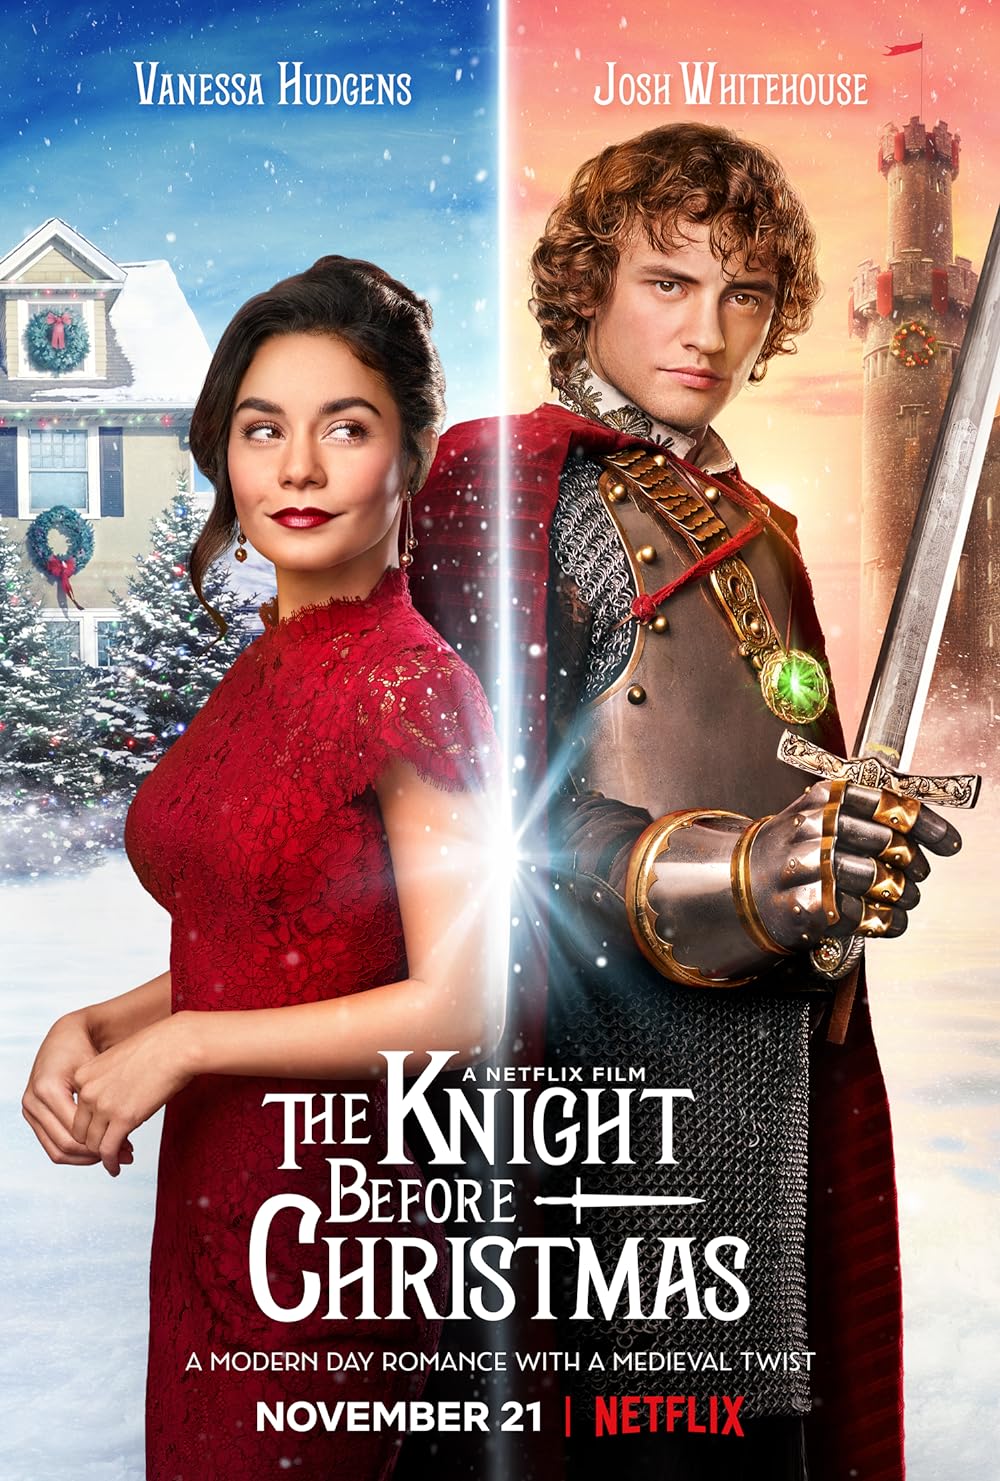 The Knight Before Christmas (2019) 640Kbps 24Fps 48Khz 5.1Ch DD+ NF E-AC3 Turkish Audio TAC